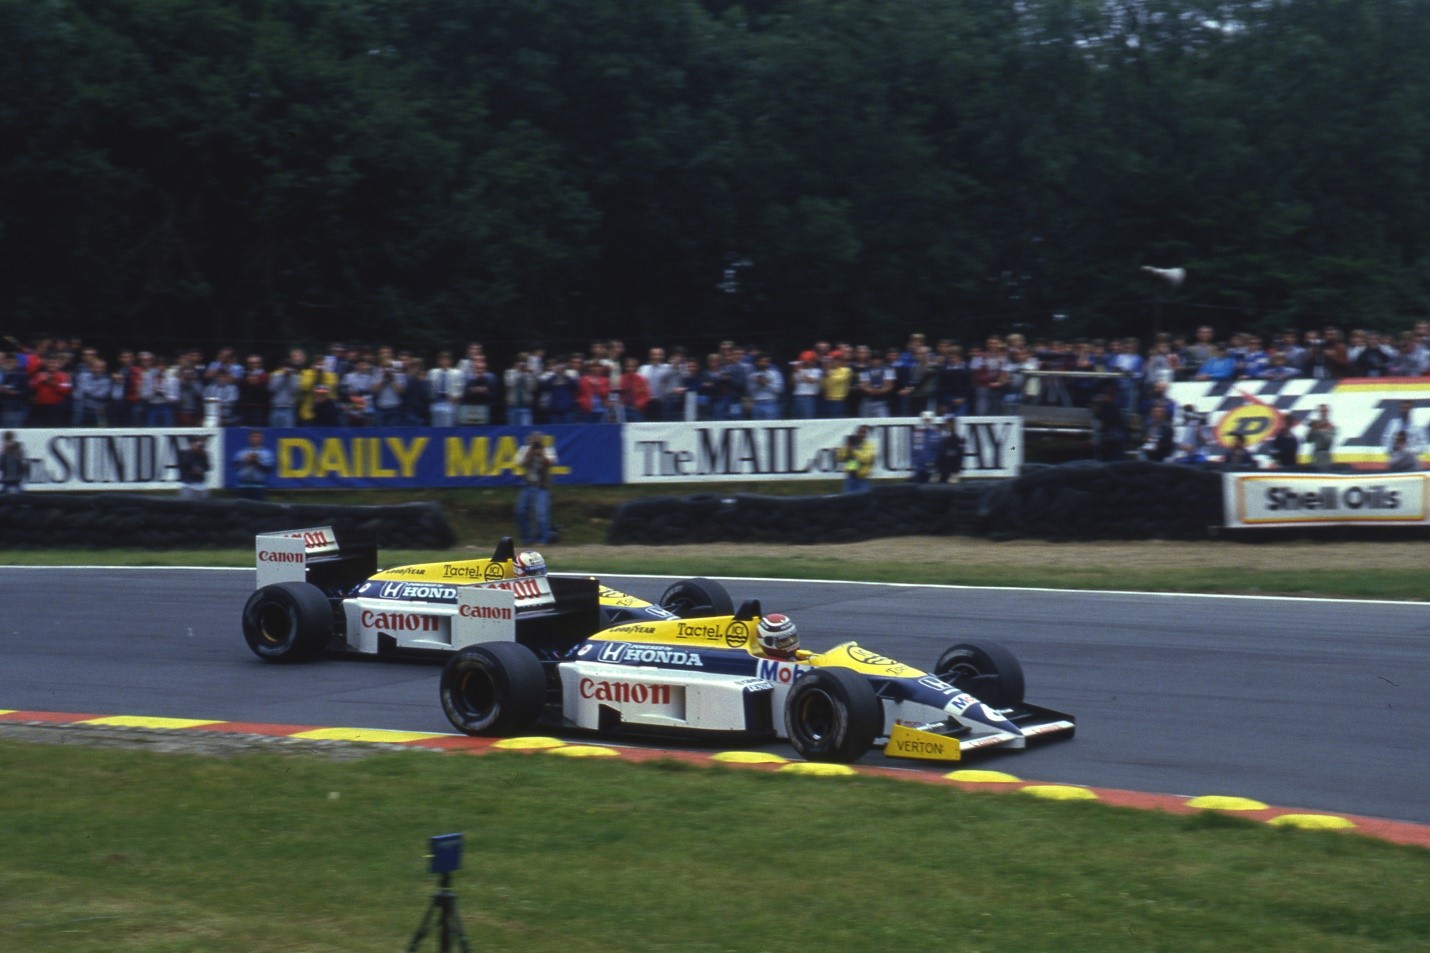 Two Williams in action.